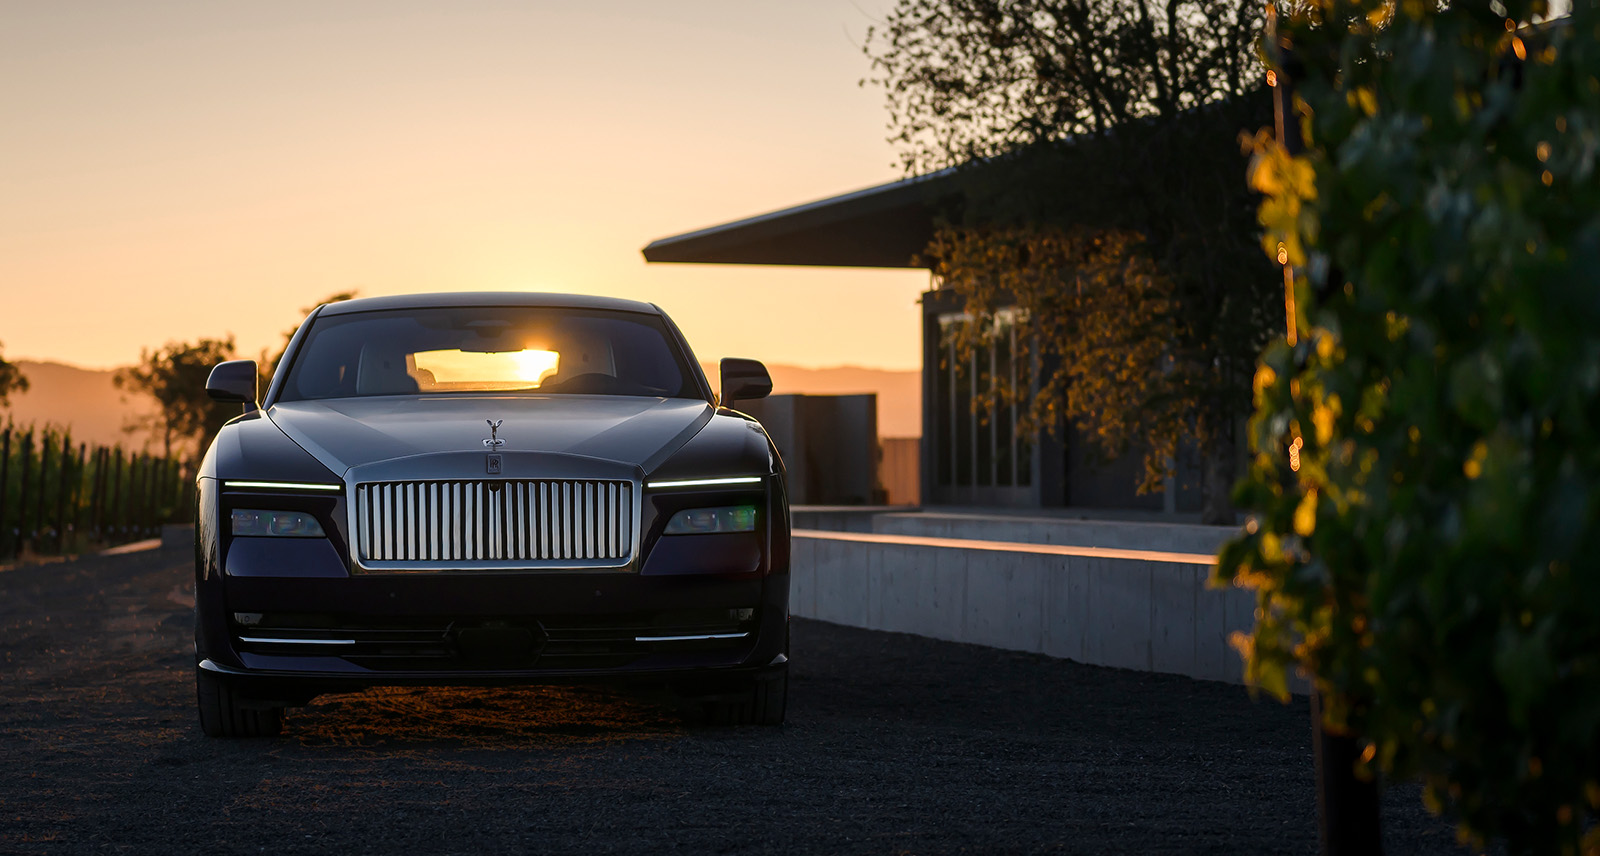 Rolls-Royce Spectre parked outside a house during sunset